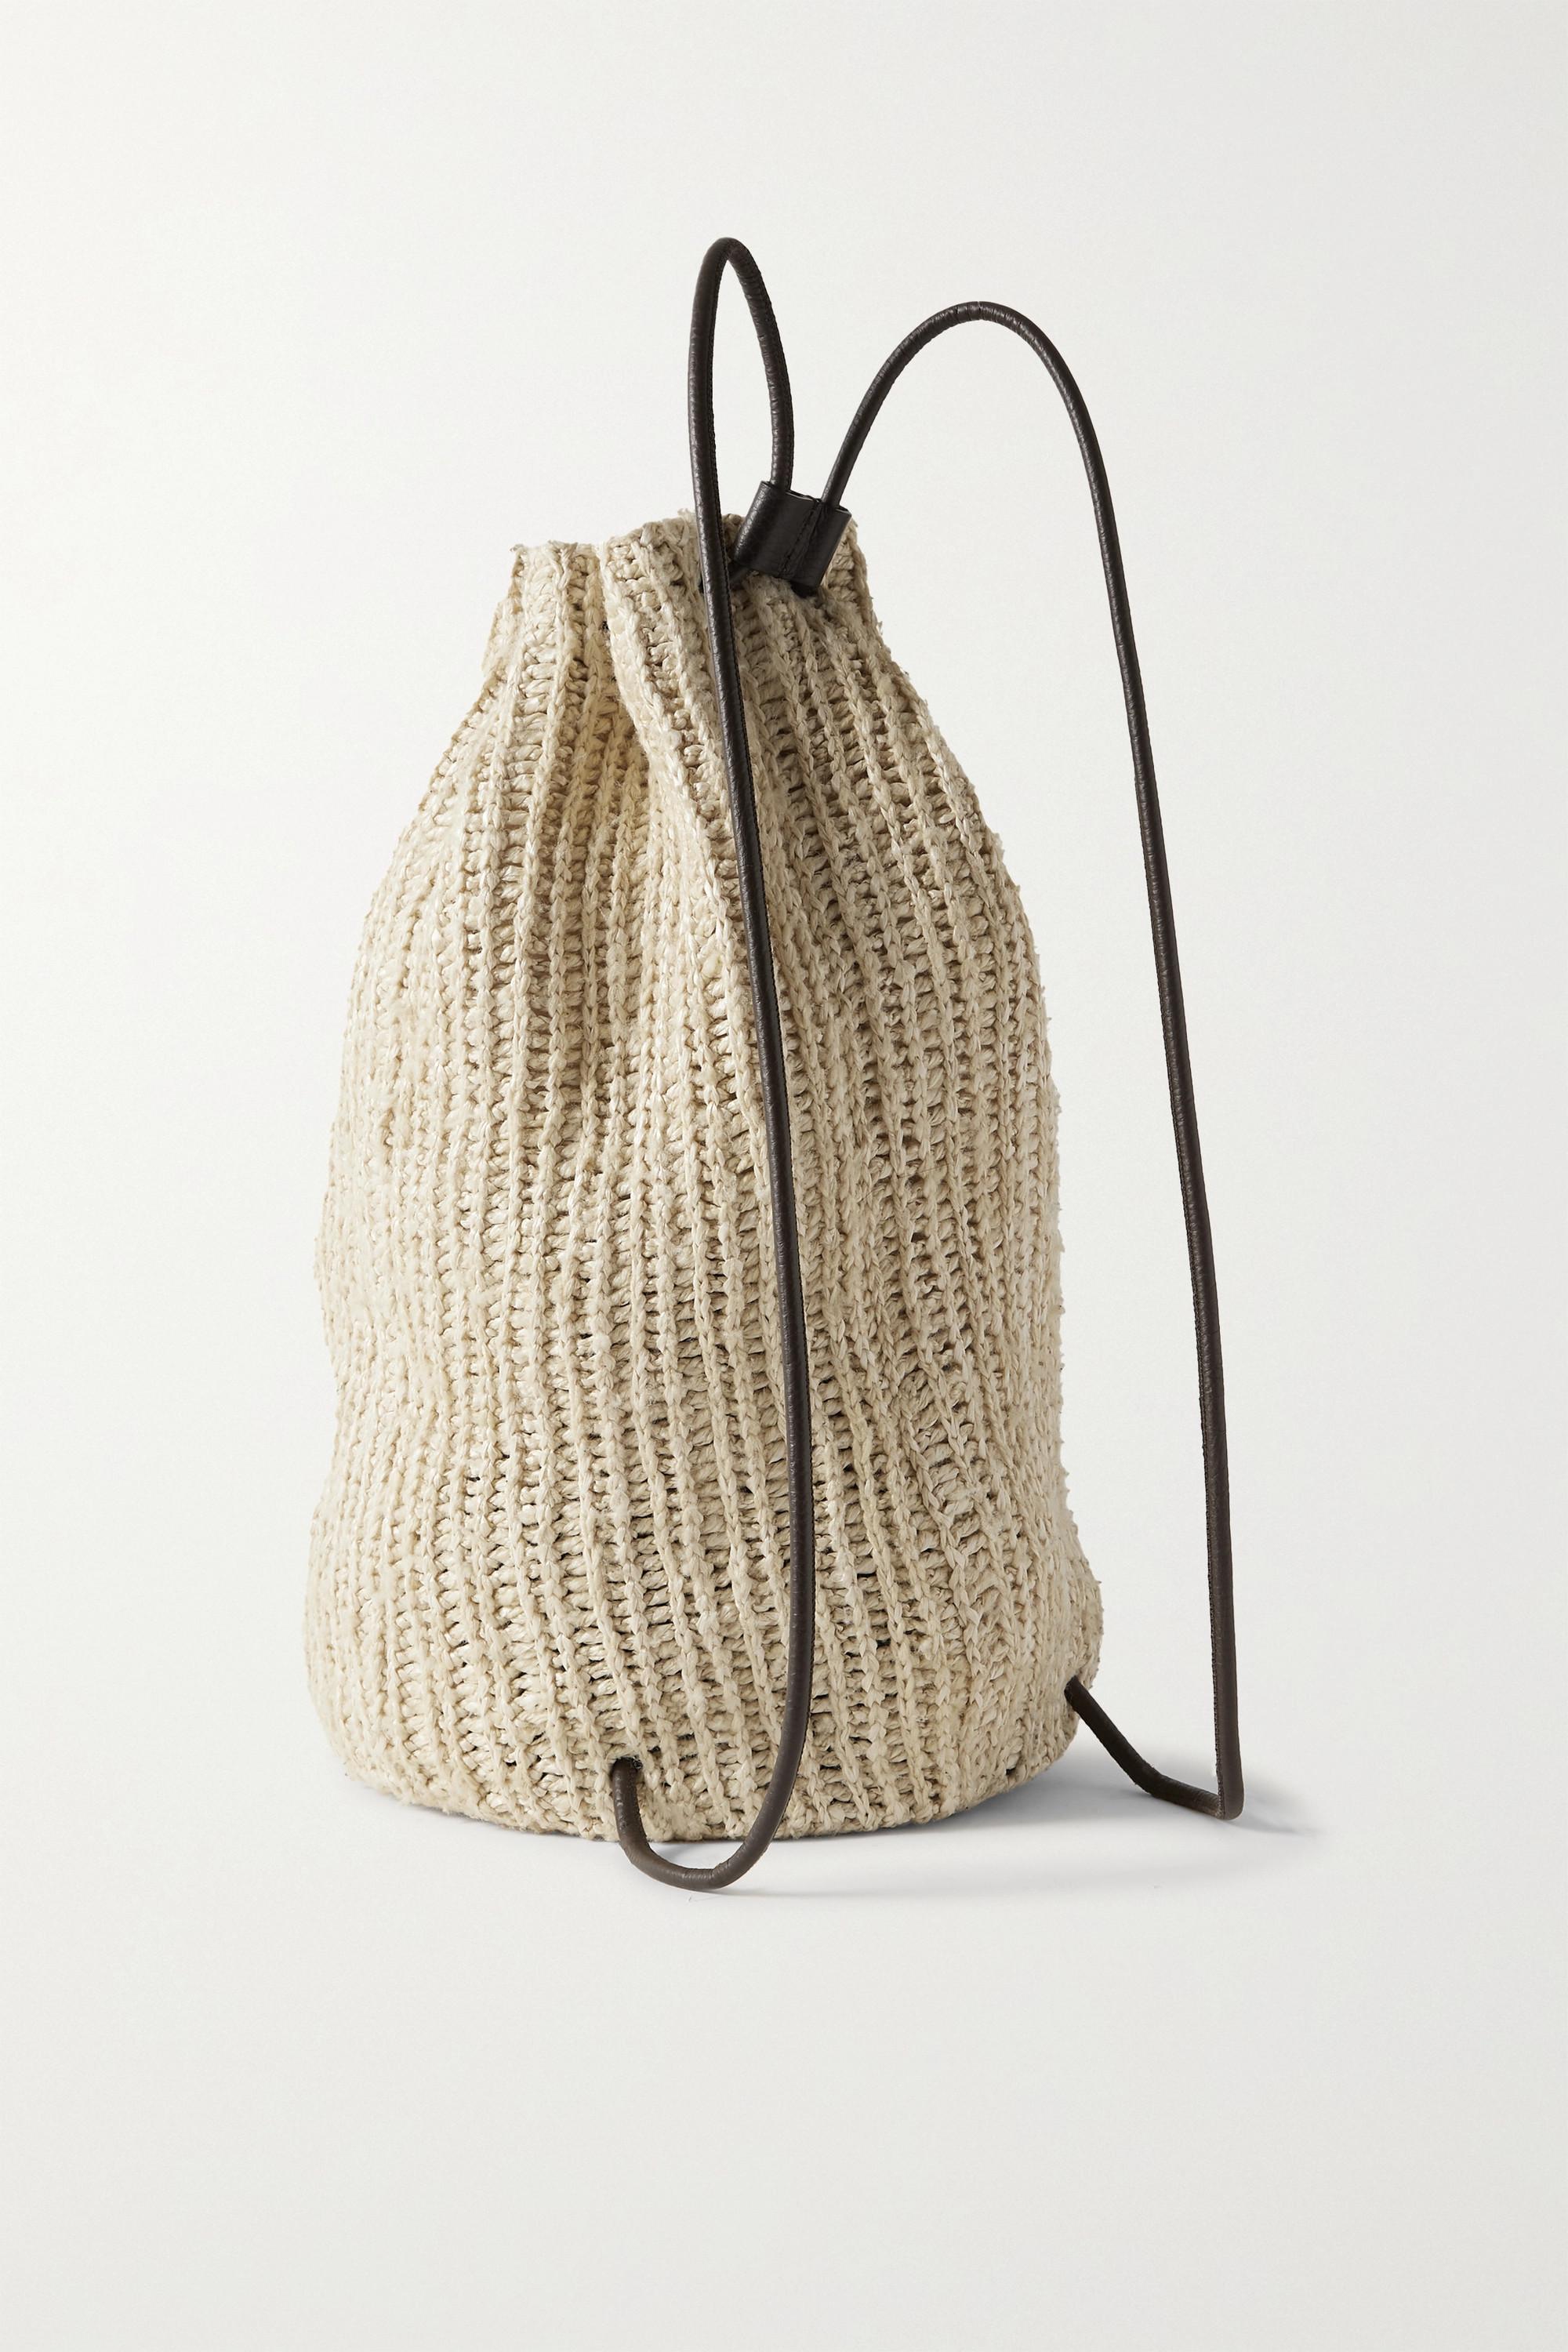 Kiki Leather-Trimmed Woven Raffia Backpack - TravelCoterie